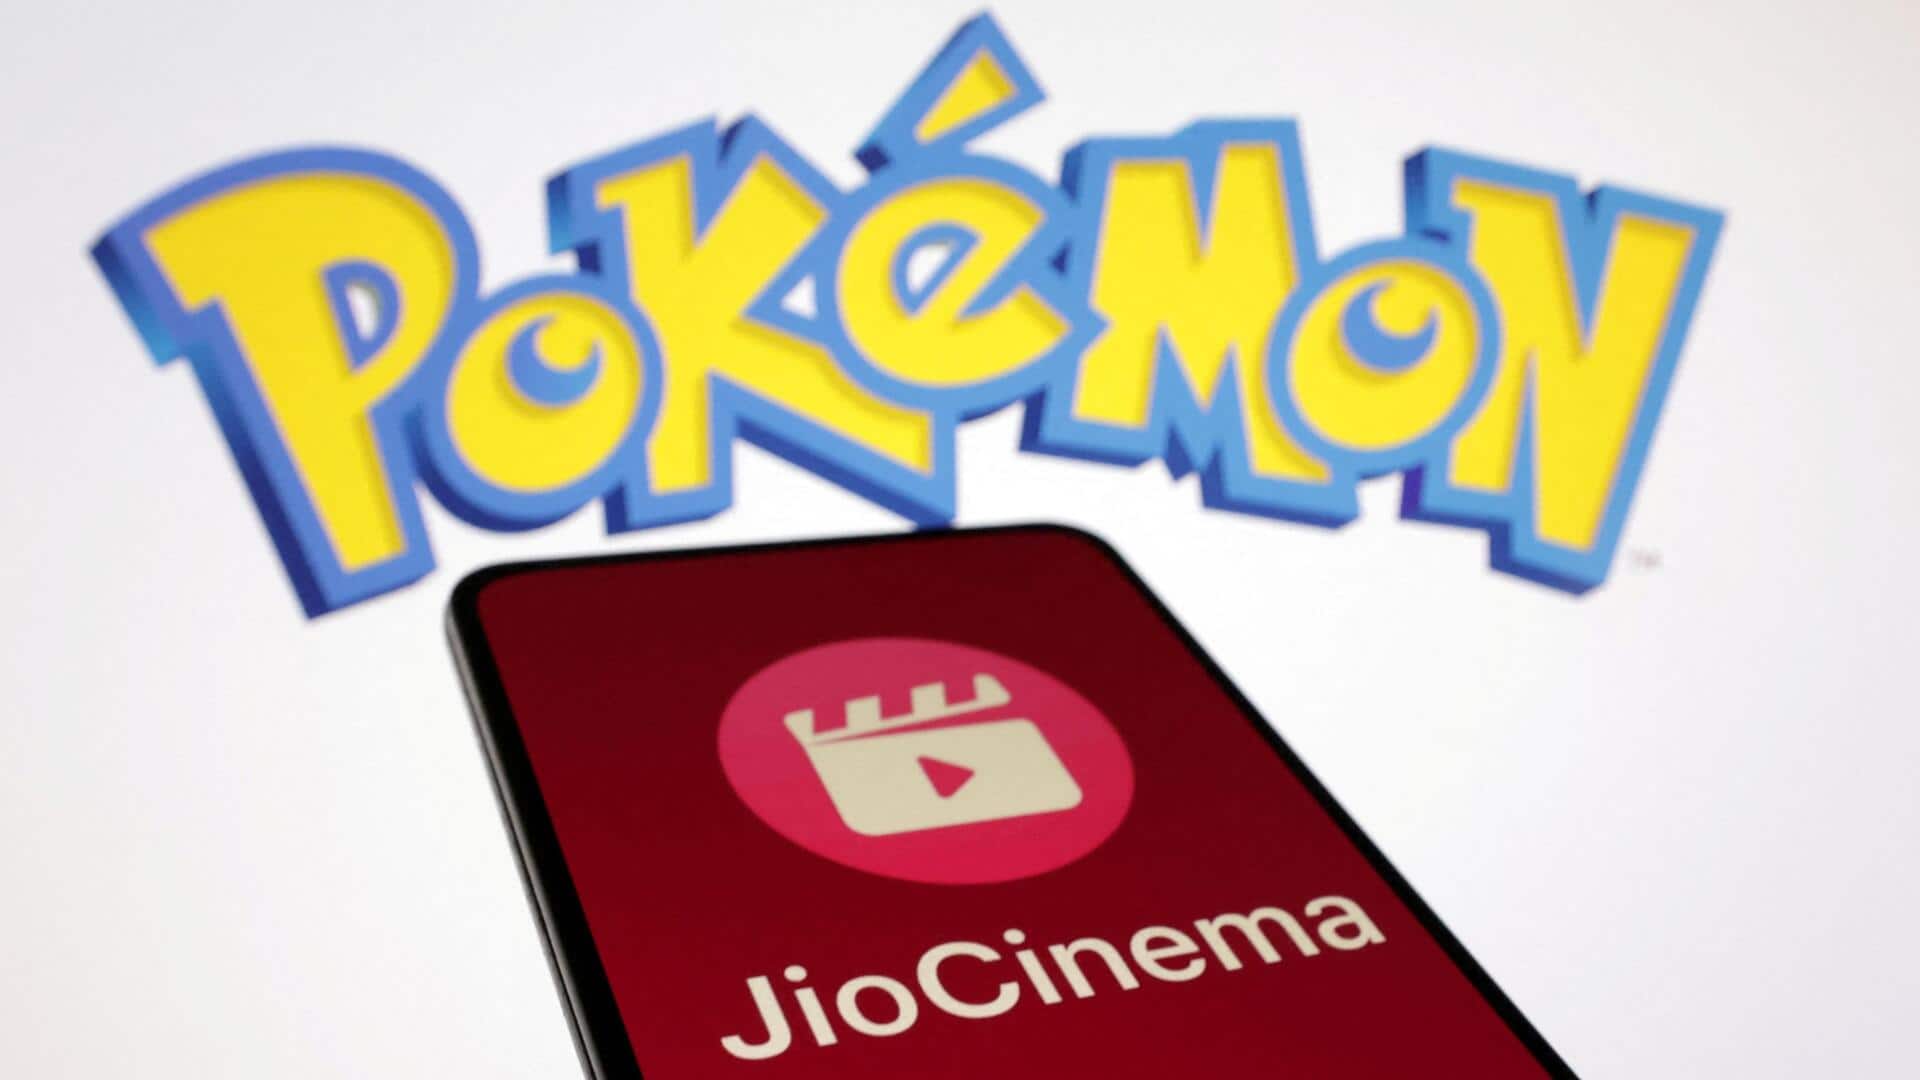 JioCinema signs exclusive pact with Pokemon for streaming children's content